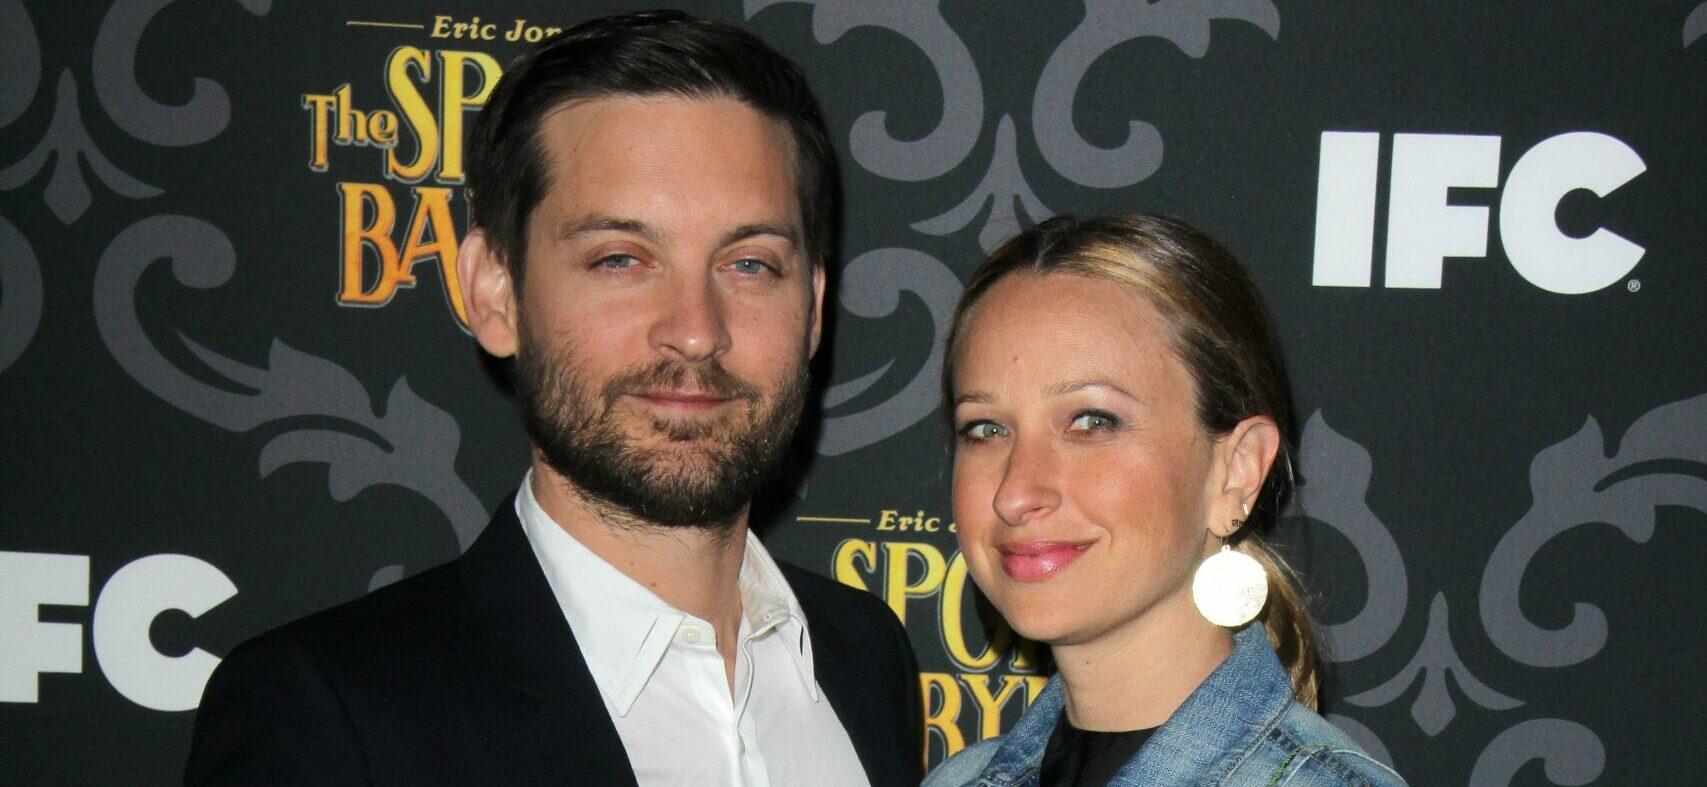 Tobey Maguire, Jennifer Meyer at "The Spoils Of Babylon" IFC Screening on January 07 2014 in Los Angeles, California.